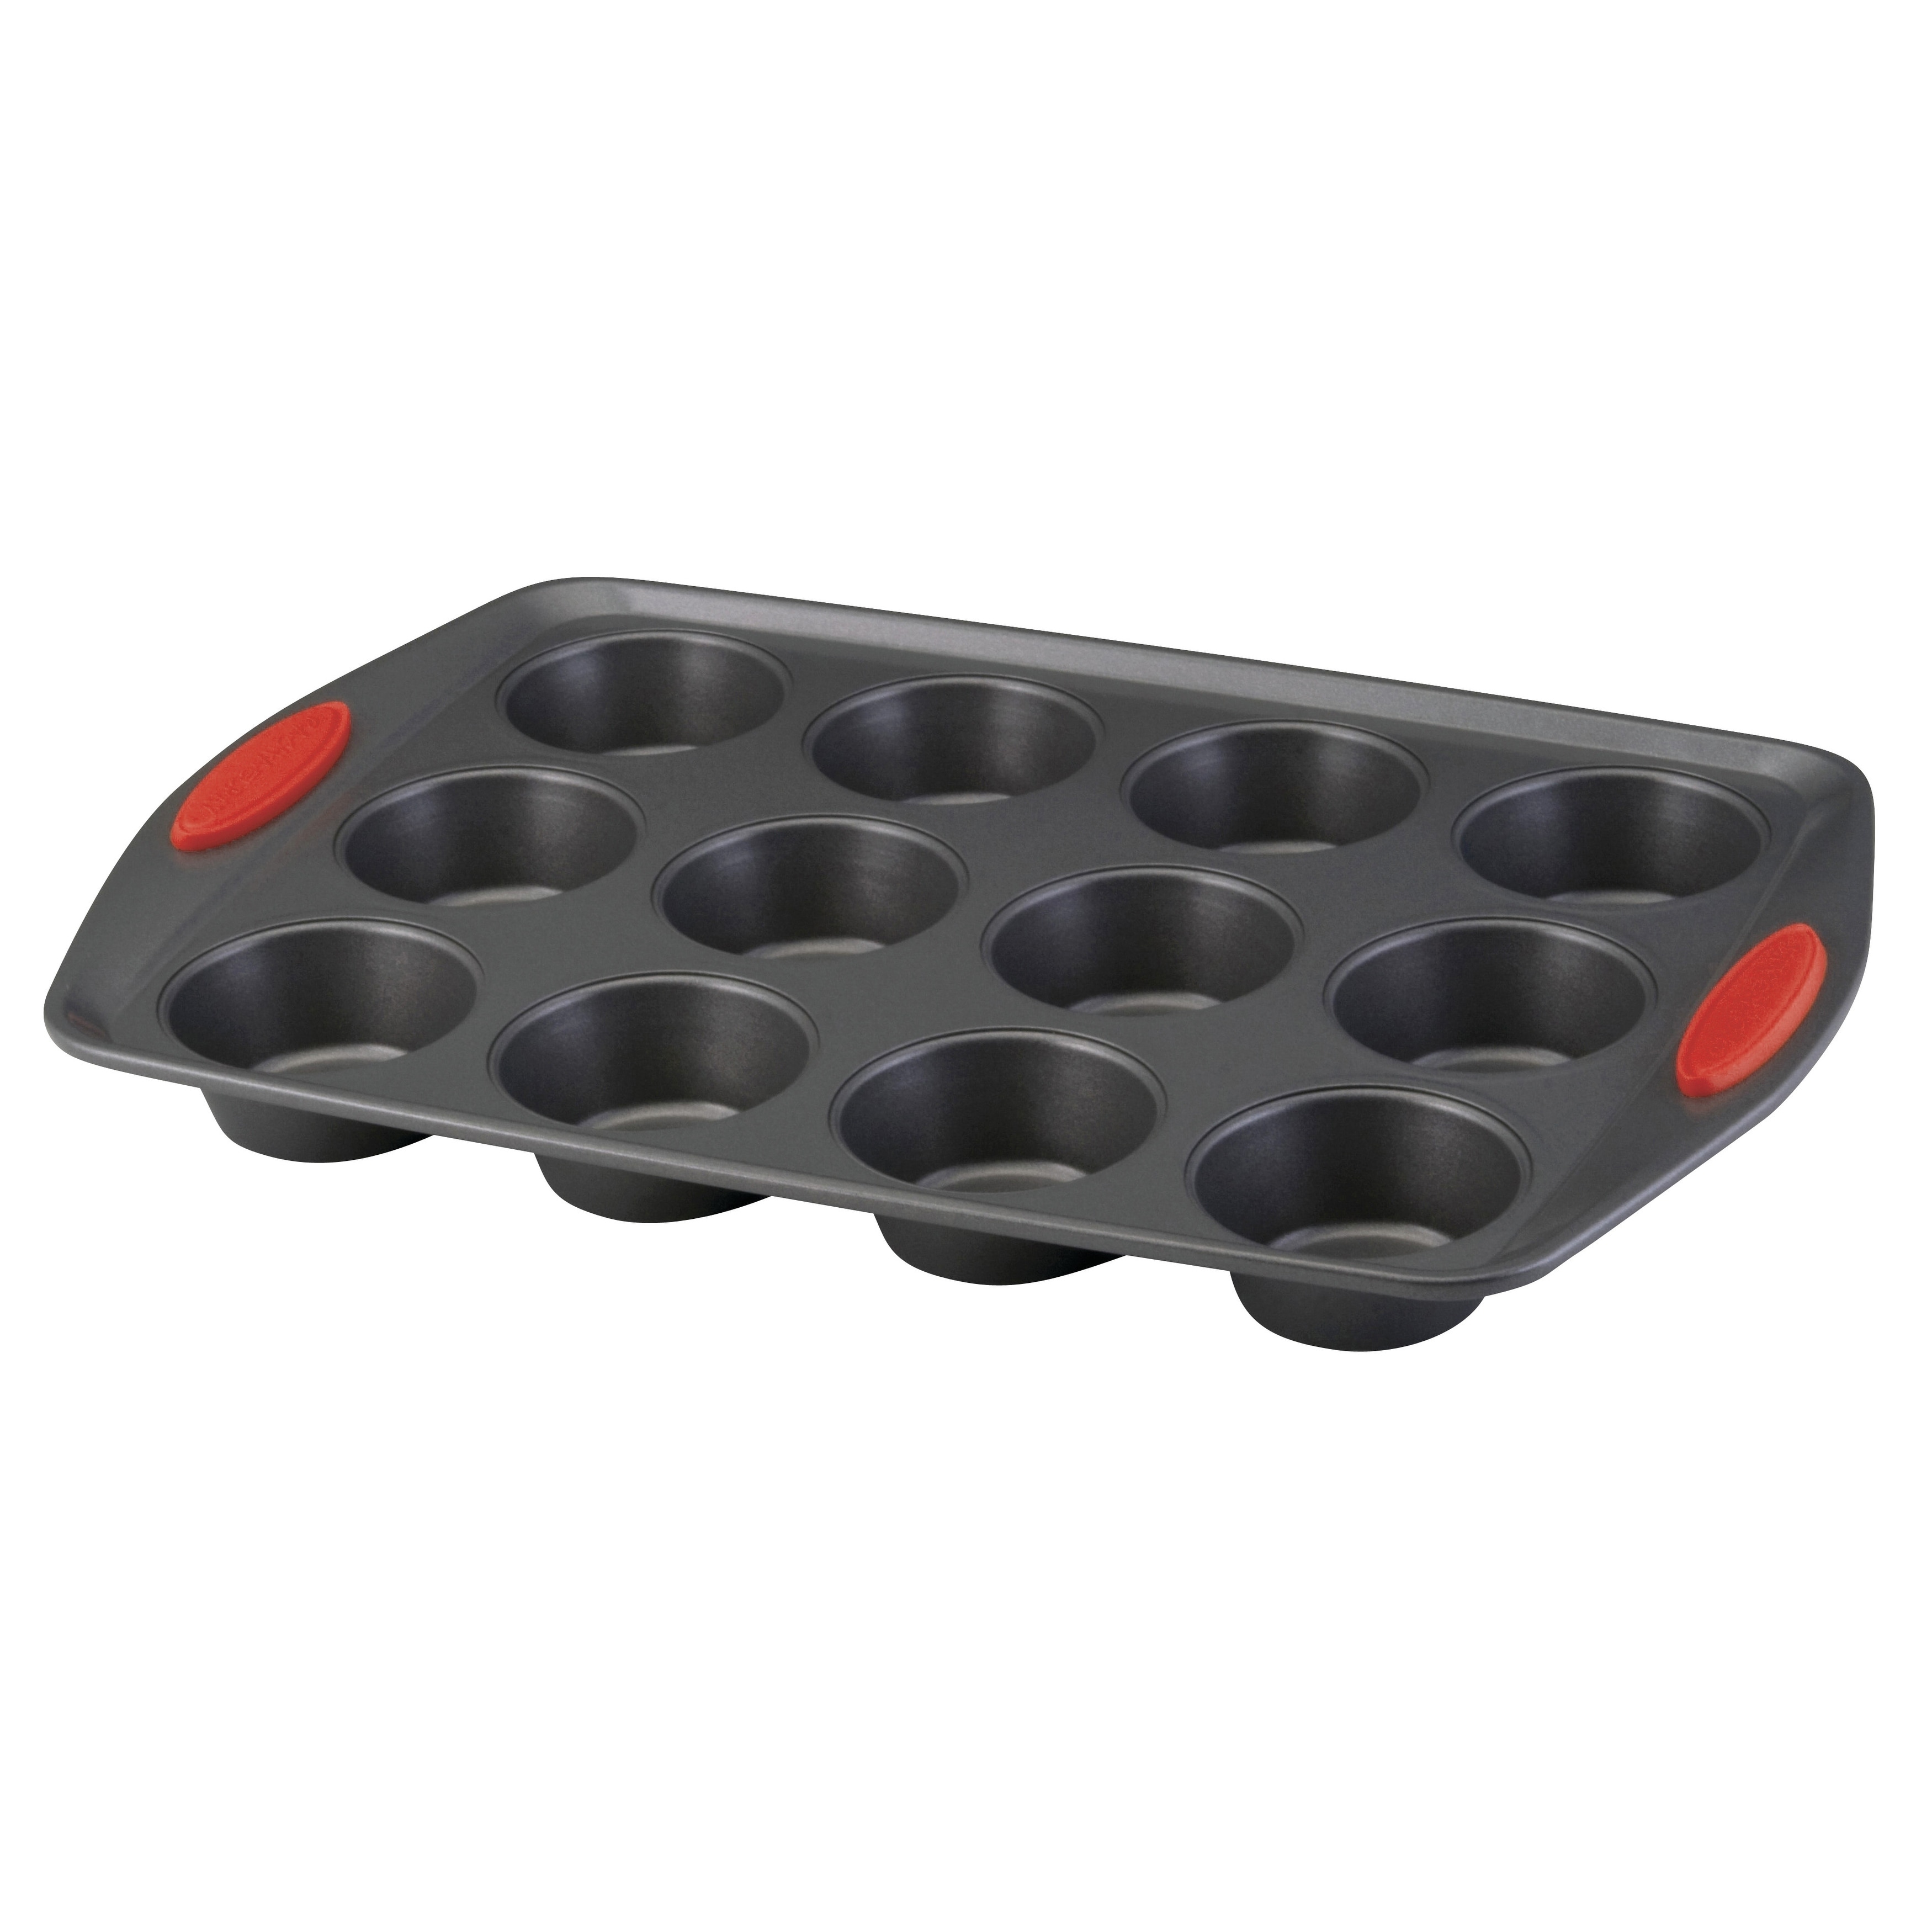 Rachael Ray Nonstick Bakeware 12-Cup Muffin and Cupcake Pan - Bed Bath &  Beyond - 29067694